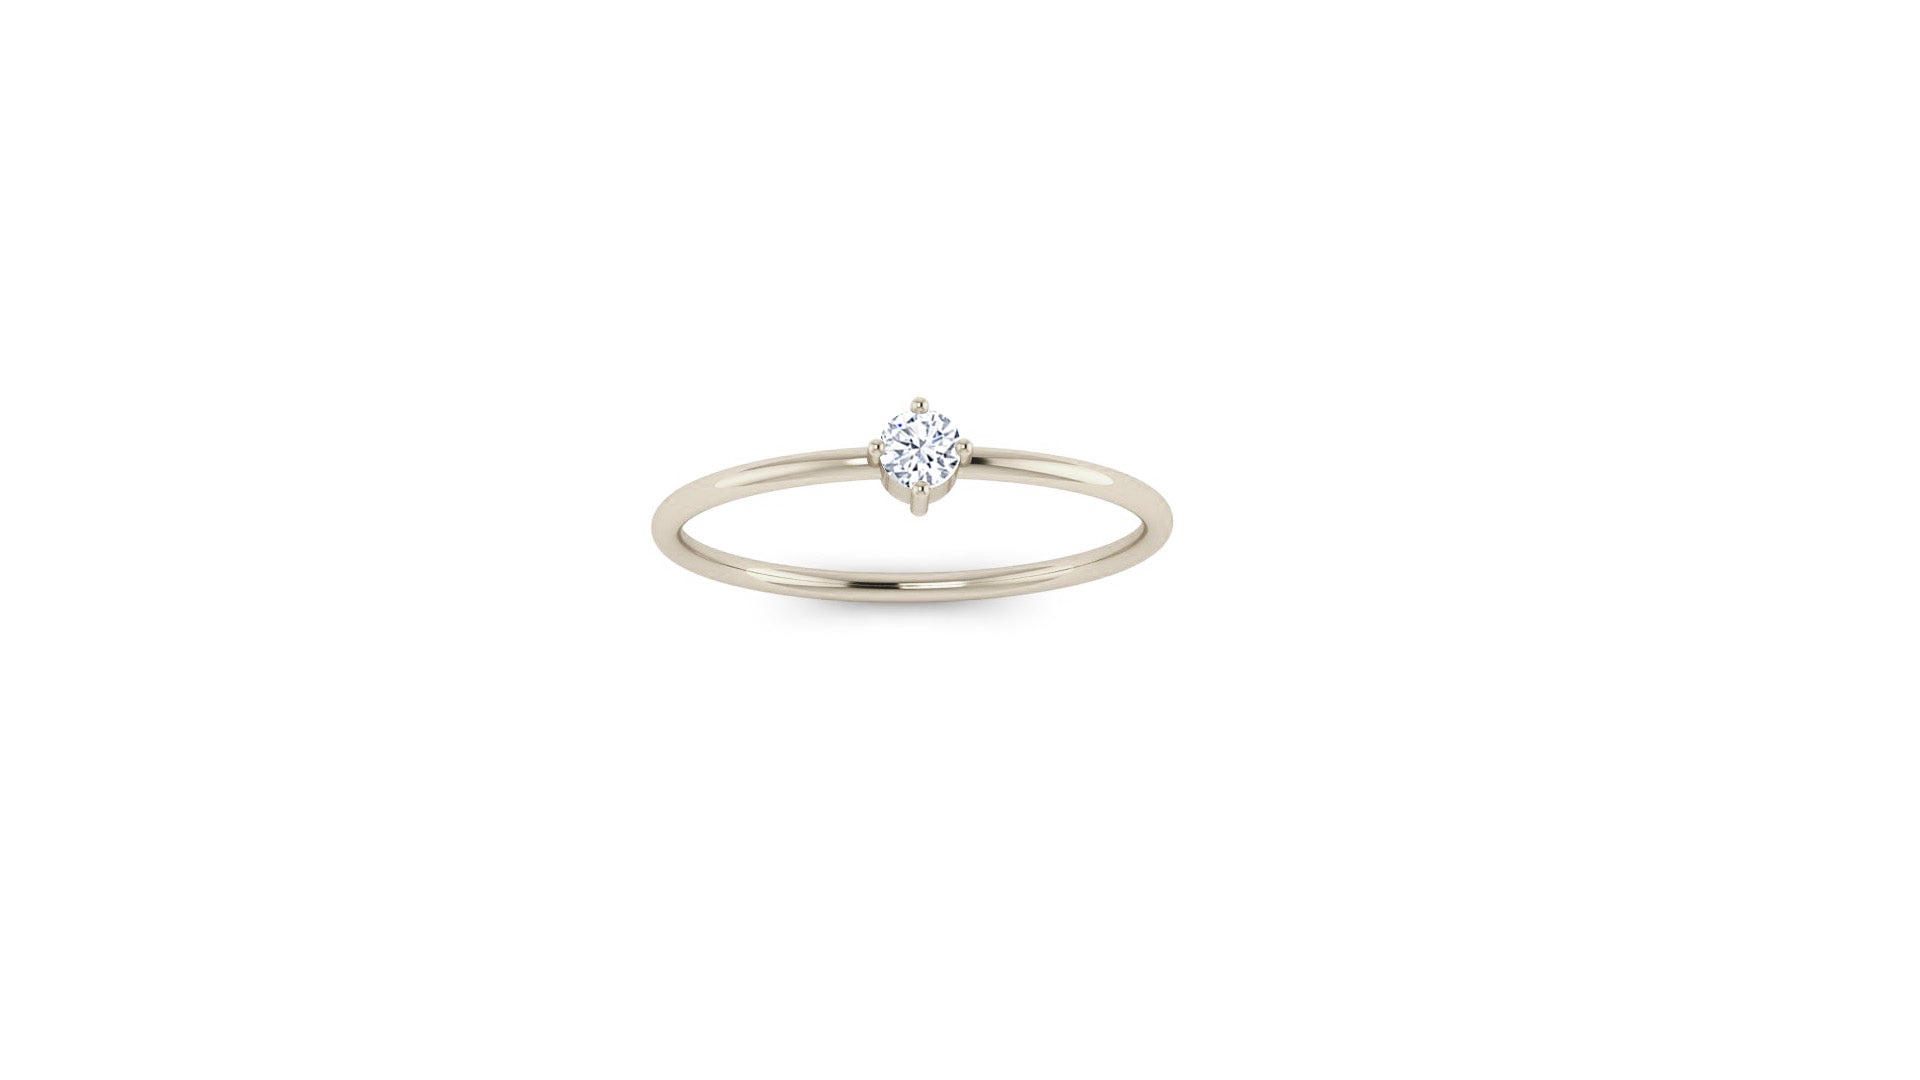 Solo Diamond Ring in 14kt White Gold